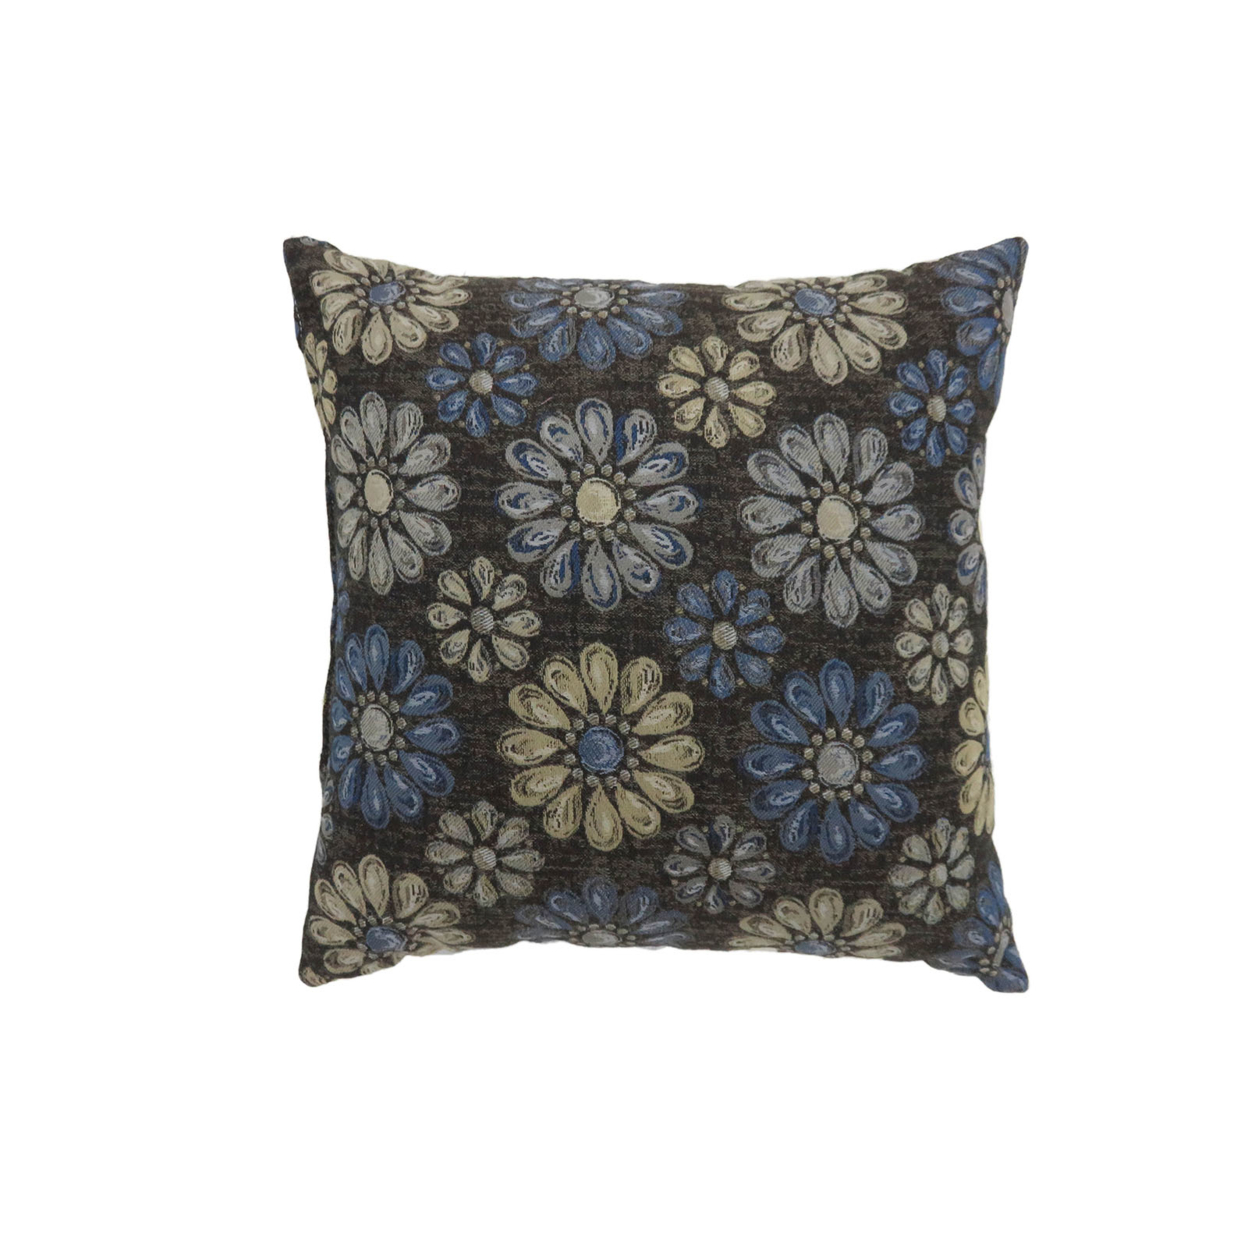 22 Inch Throw Pillow, Set Of 2, Polyester Floral Design Fabric, Dark Gray, Blue